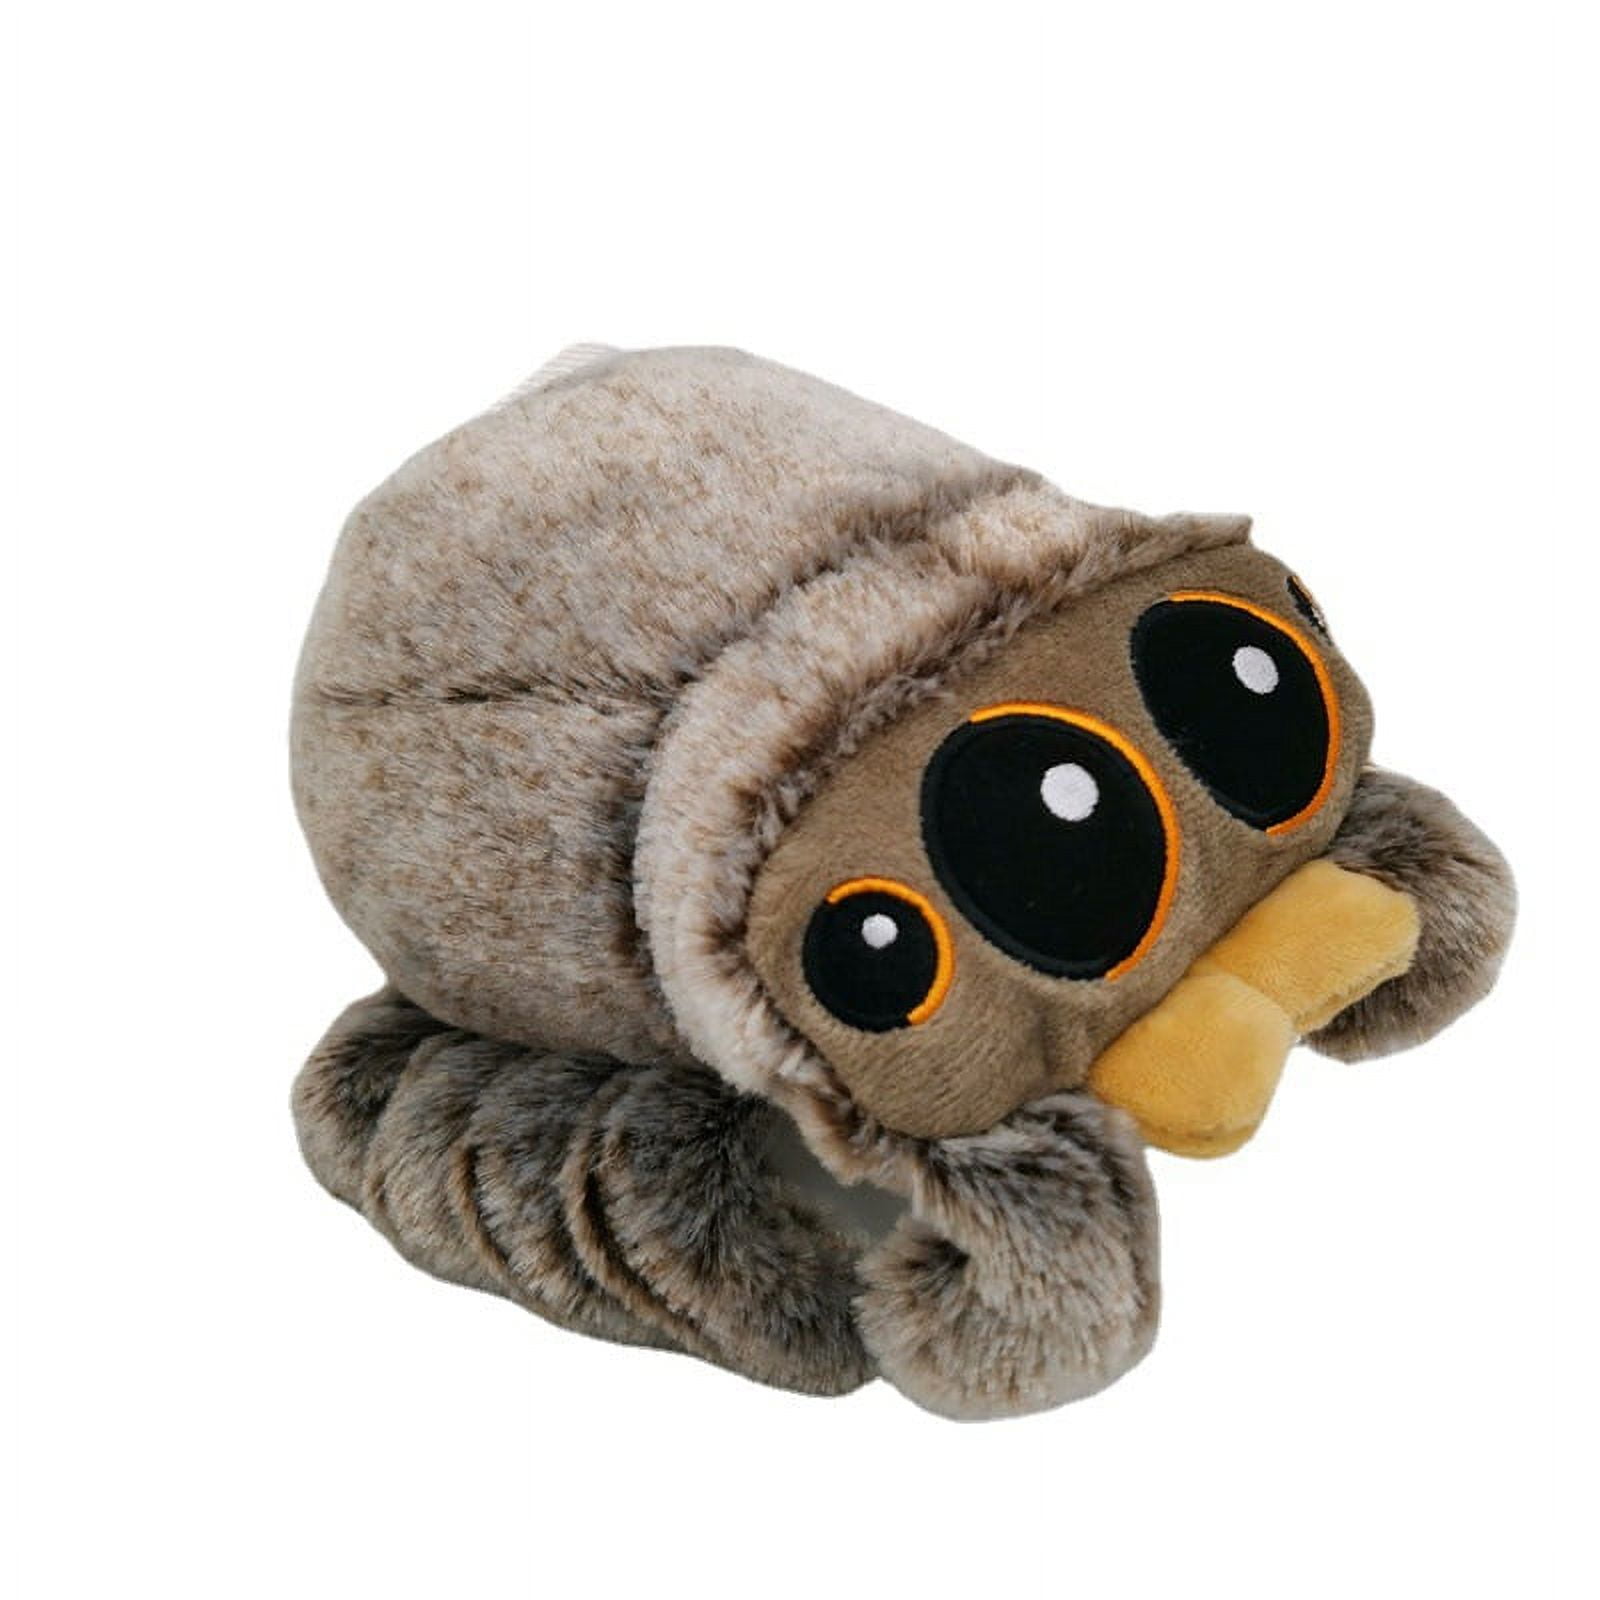  Cute Jumping Spider Plush Toy, Salticidae Springspinnen Spider  Stuffed Animals Soft Spider Plushie Dolls Birthday Gifts for Kids Fans  Adults Children : Toys & Games